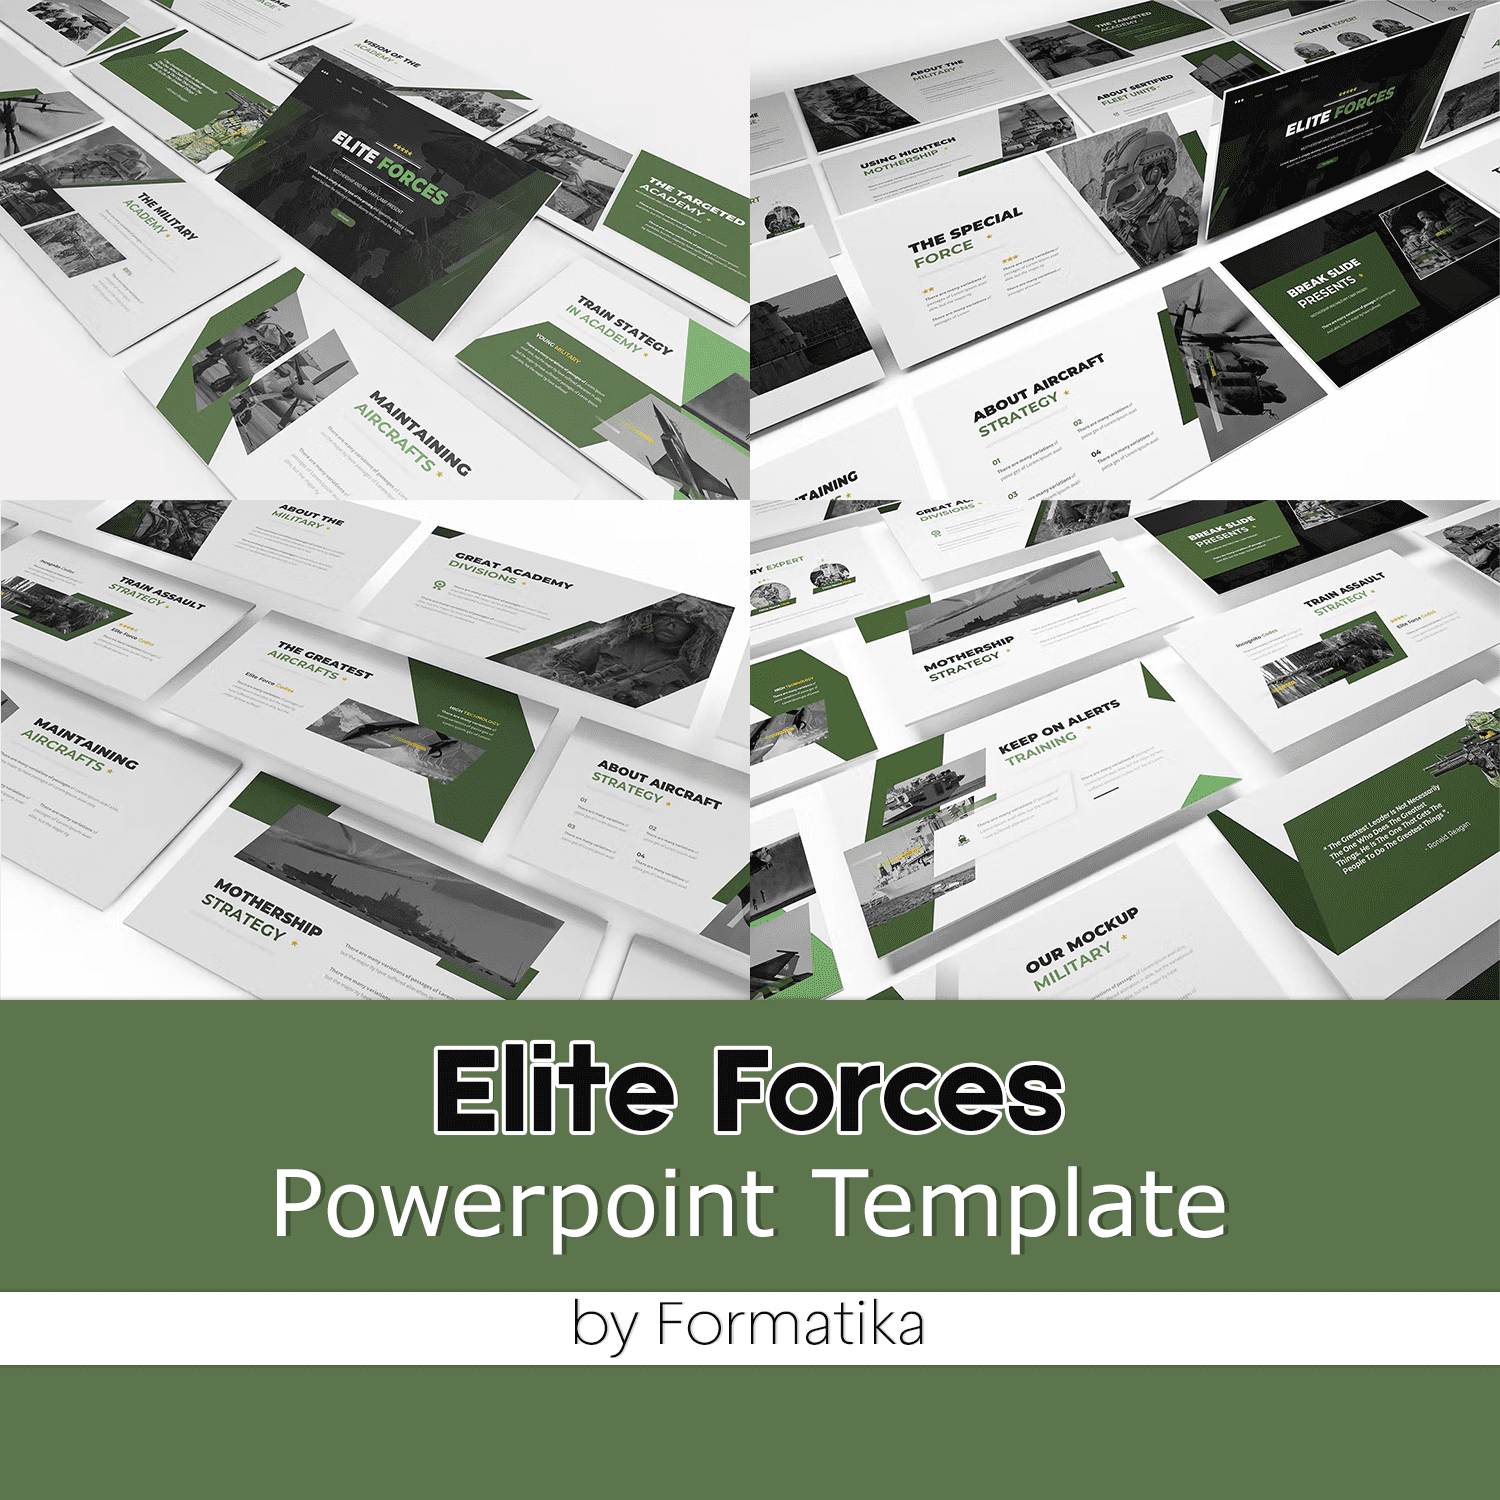 Elite Forces Power Template Cover.